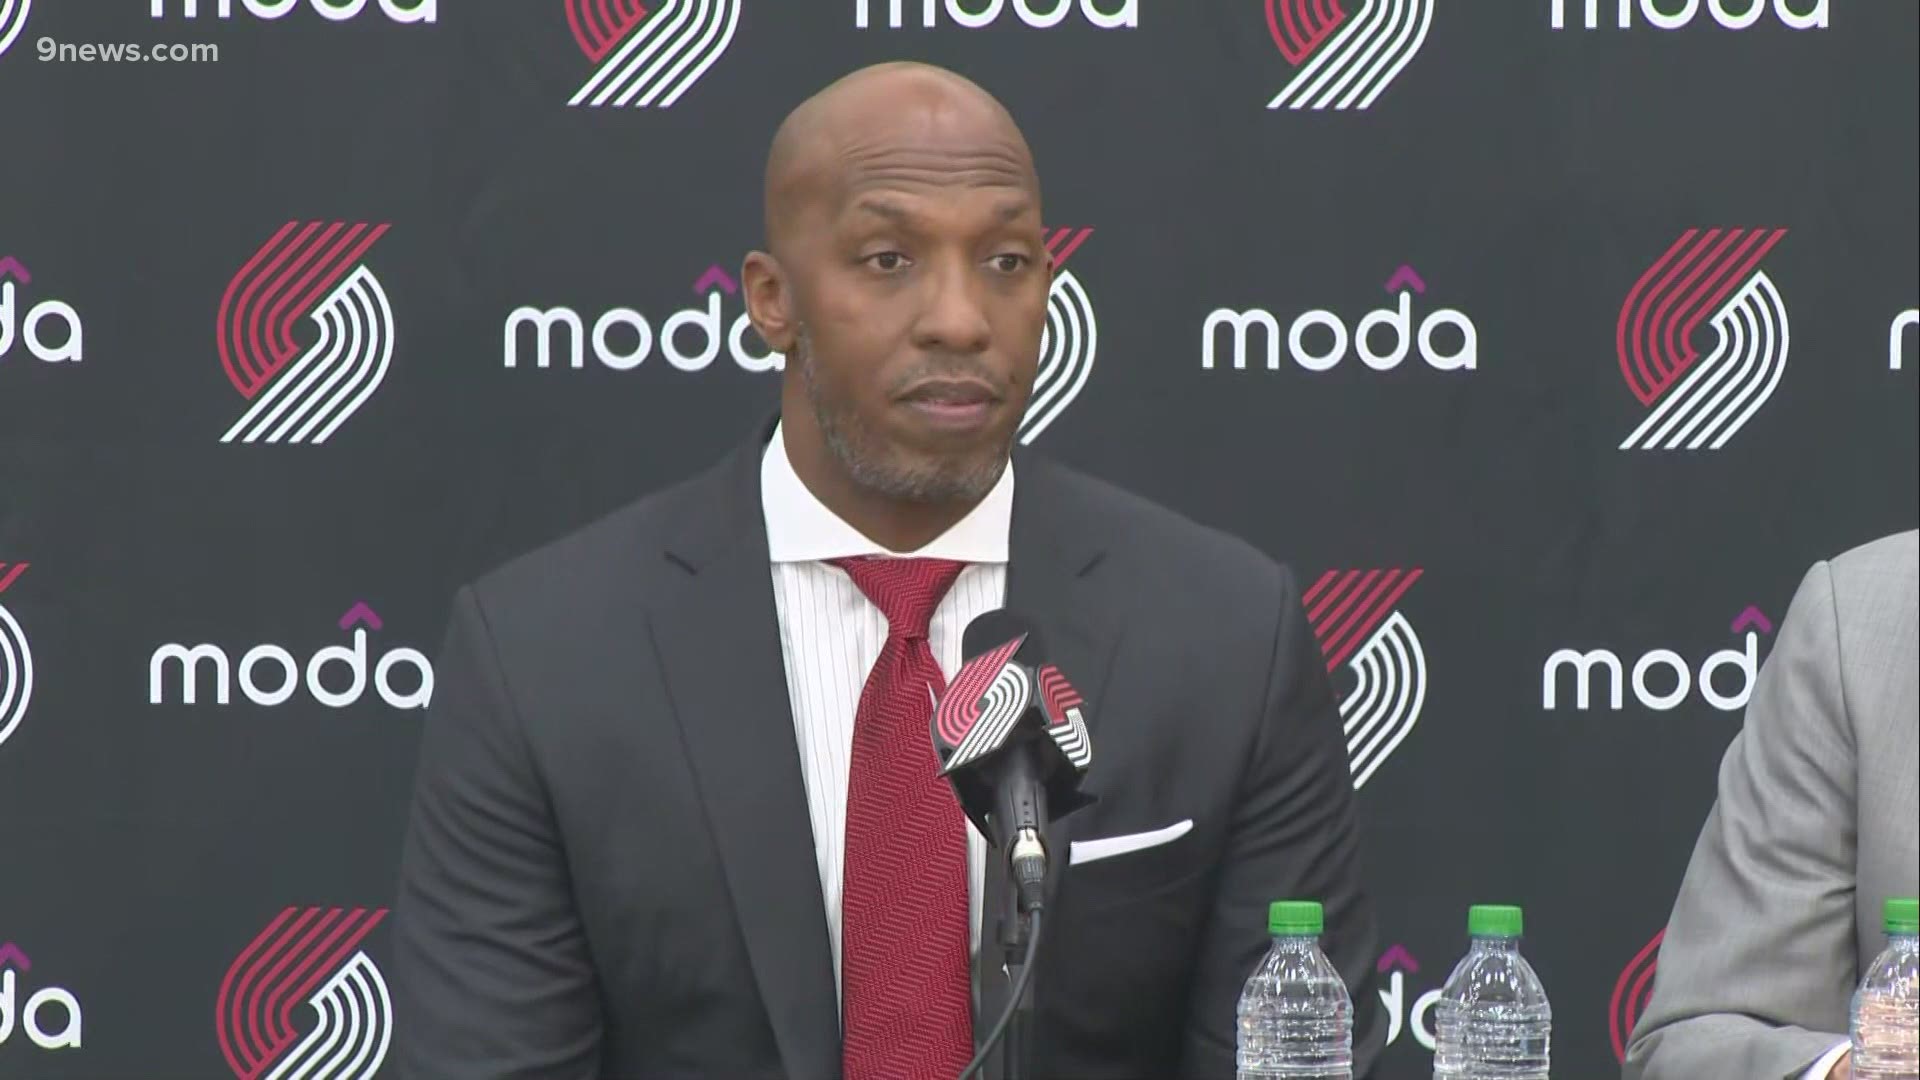 Jacob Tobey joined 9NEWS at 4 p.m. to discuss Portland hiring Chauncey Billups as the team's next head coach.